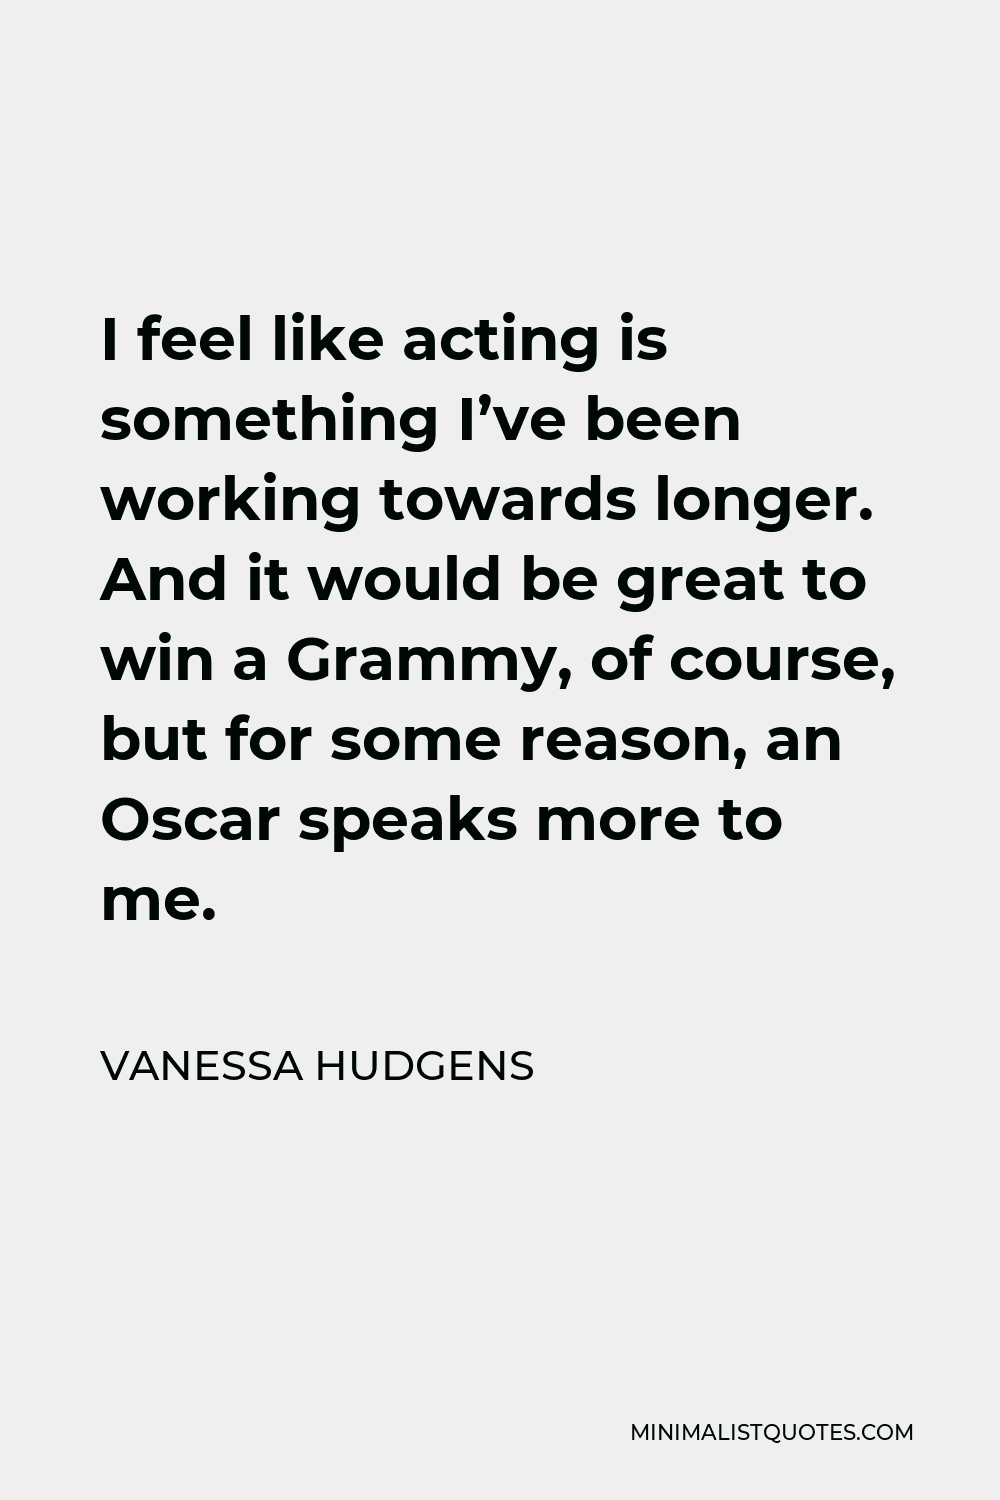 Vanessa Hudgens Quote - I feel like acting is something I’ve been working towards longer. And it would be great to win a Grammy, of course, but for some reason, an Oscar speaks more to me.